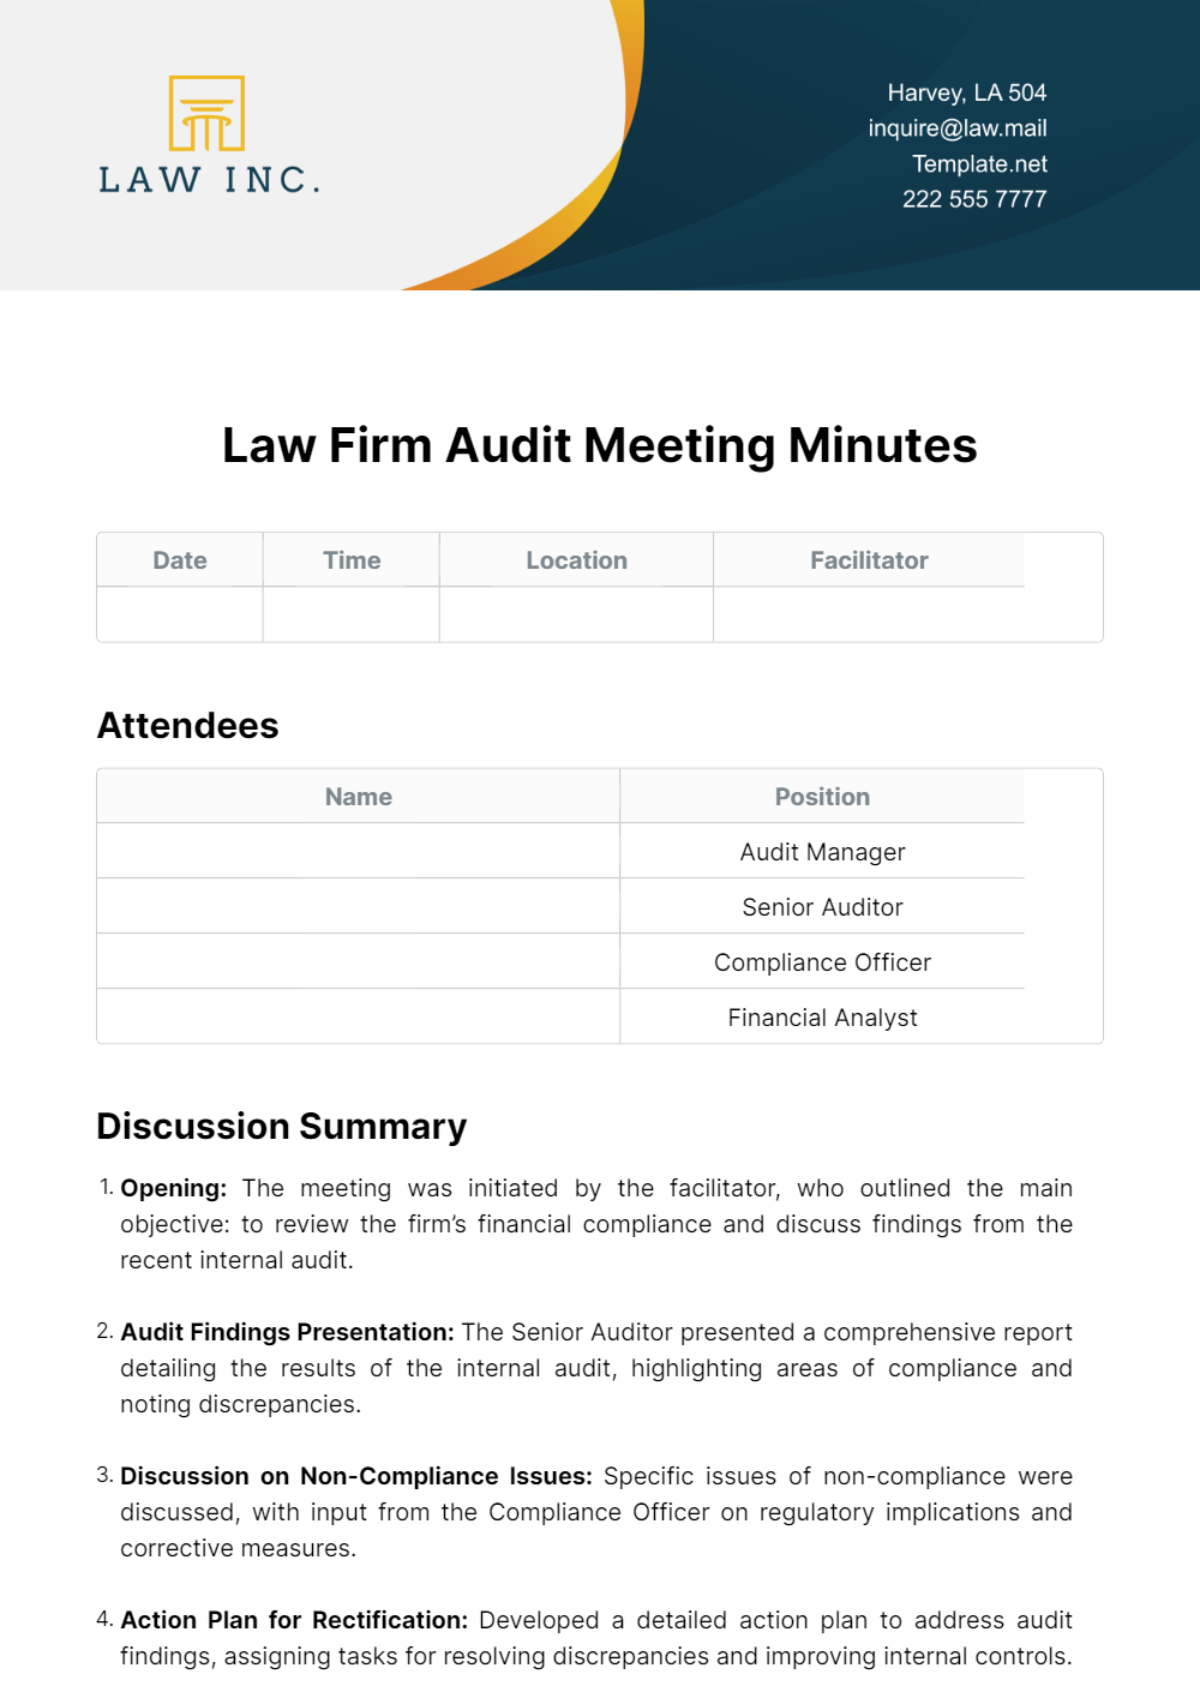 Law Firm Audit Meeting Minutes Template